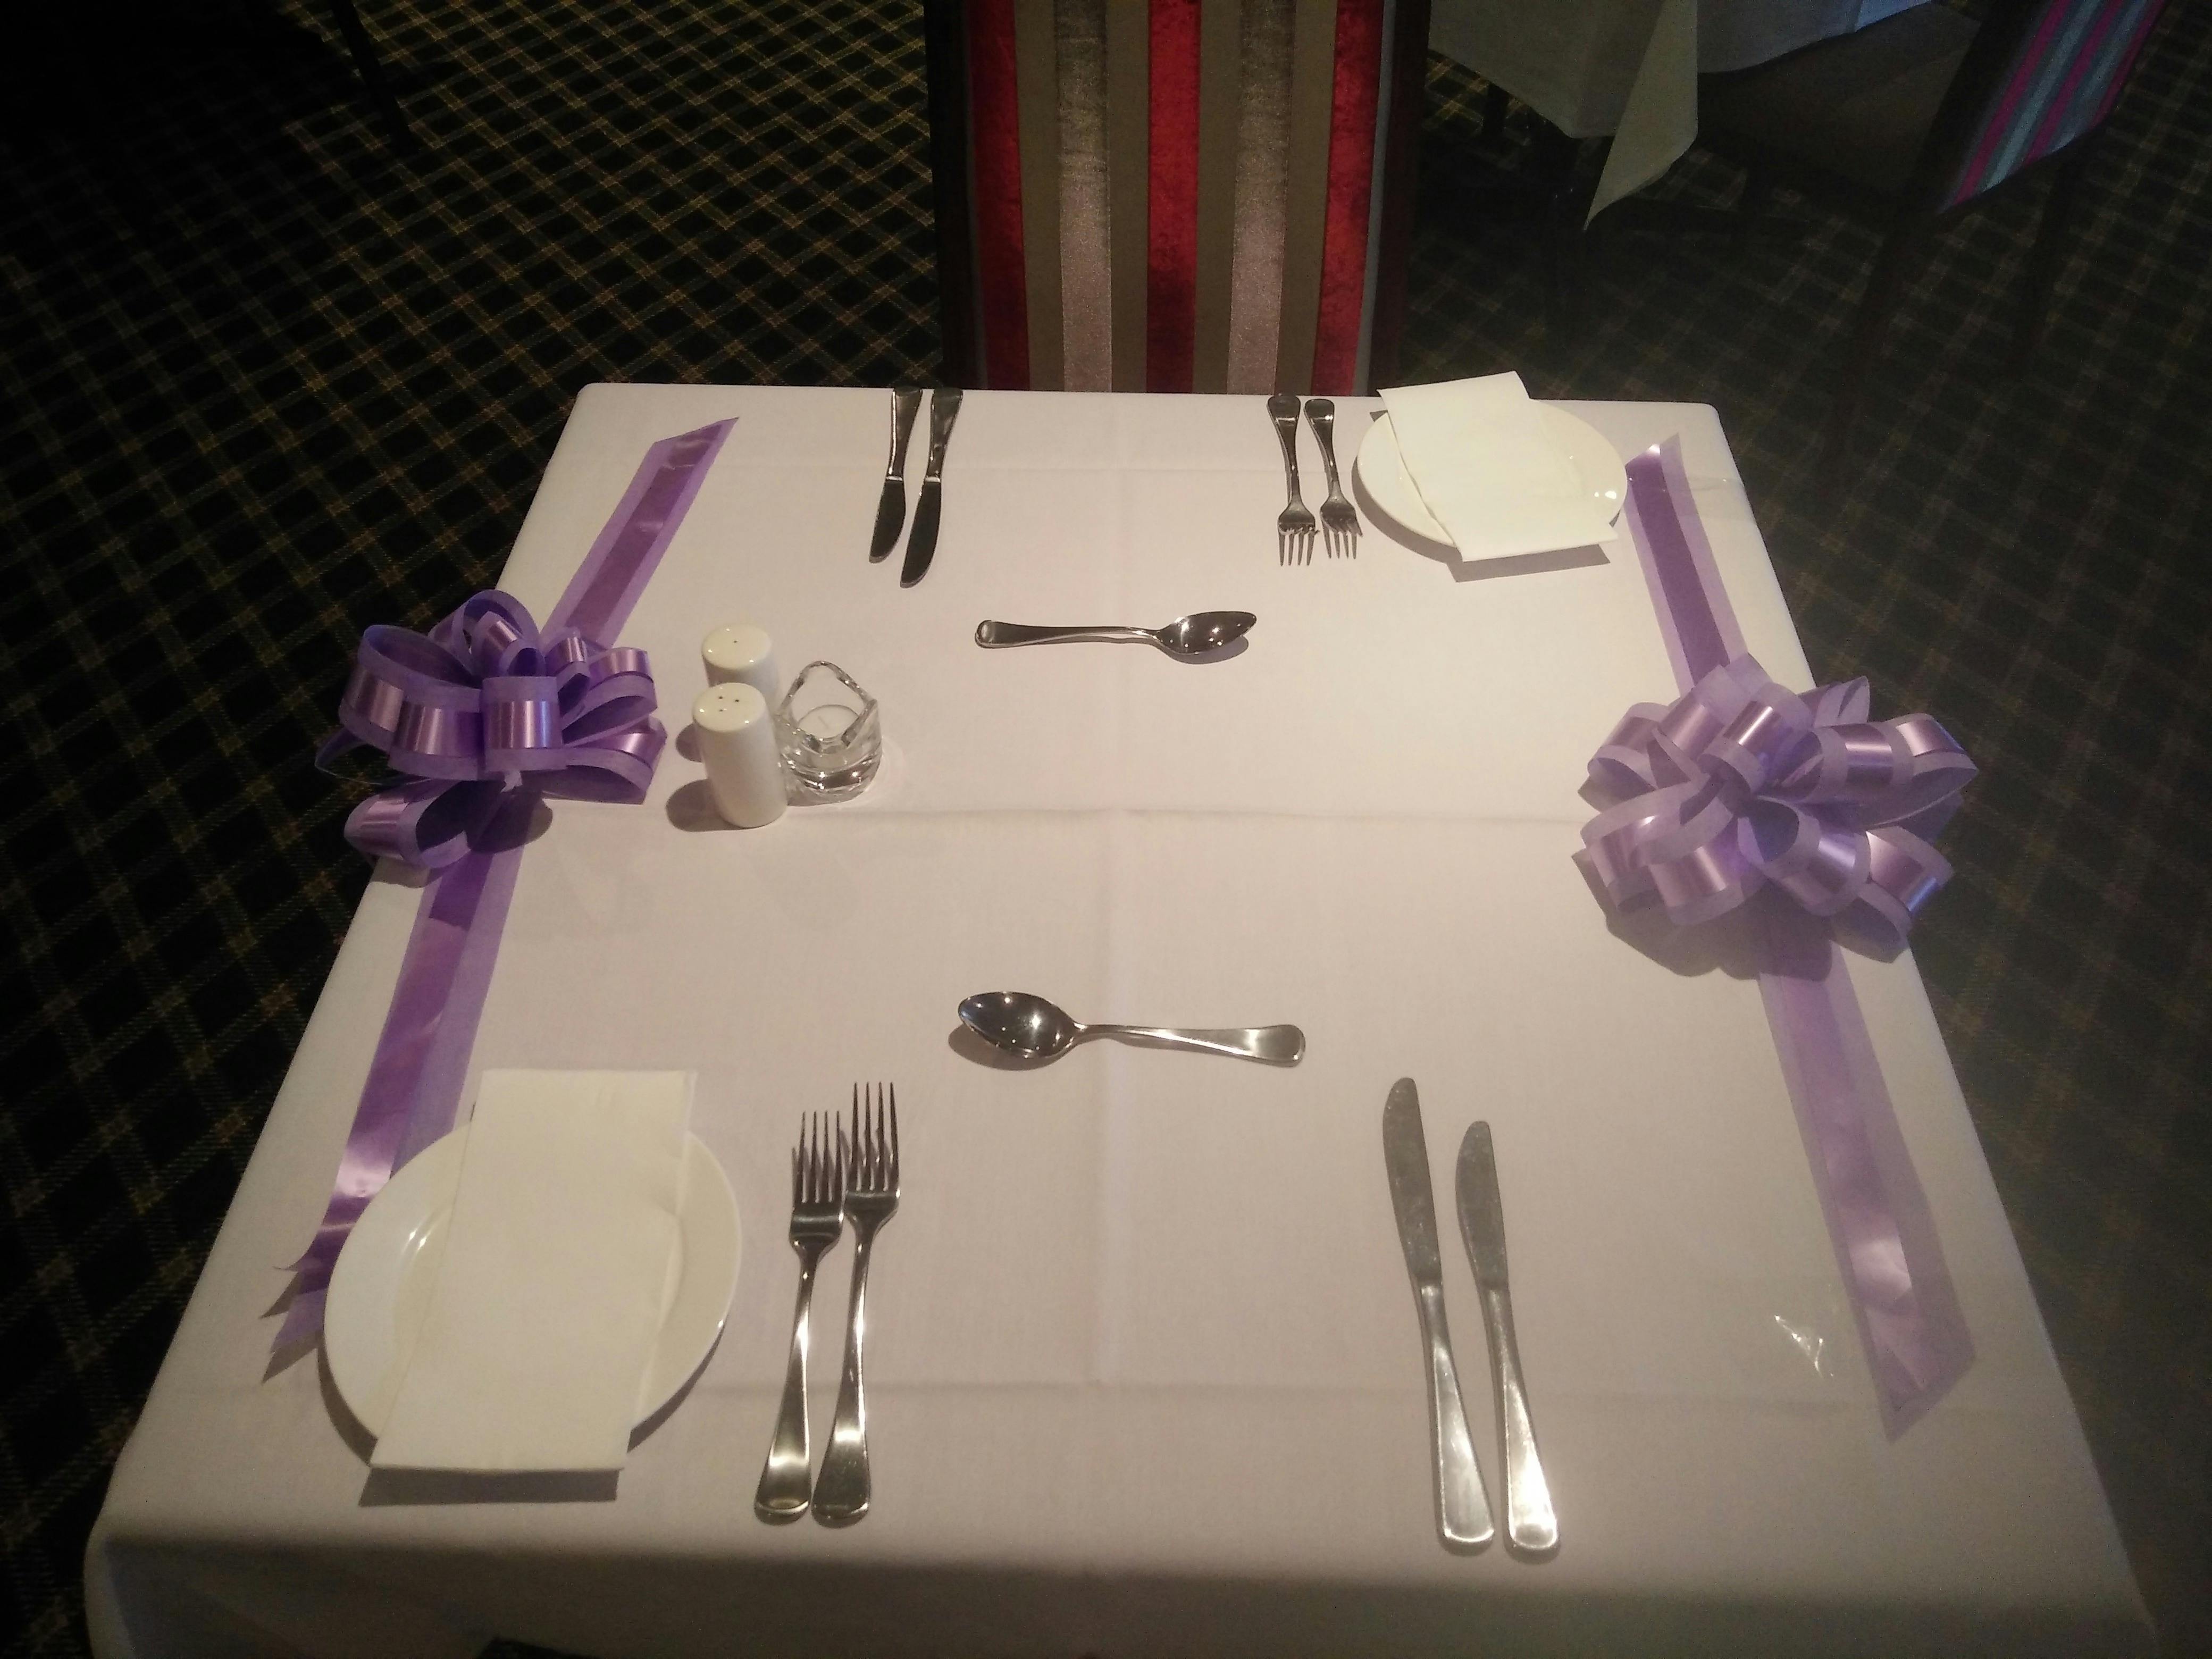 We organise  conferences, wedding, birthday parties and all sorts of group bookings.